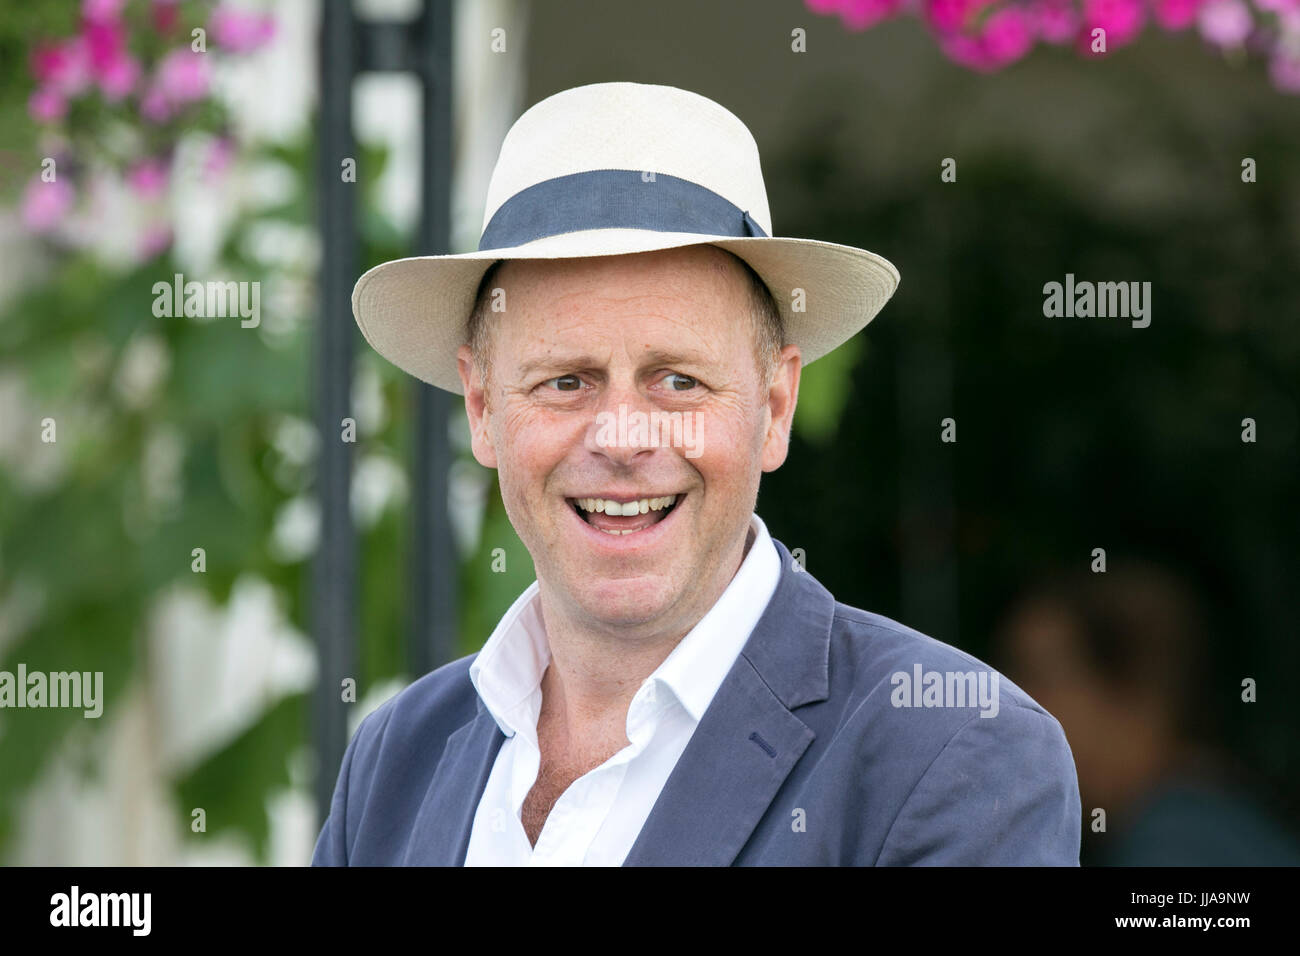 RHS Tatton Park Flower Show, Knutsford, Cheshire. 19th July 2017. Famous celebrity gardener 'Joe Swift' spotted as the gates open on this years floral masterclass at the Royal Horticultural Society's Tatton Park Flower Show 2017. Keen gardeners can immerse themselves in the beauty, fragrance and colour of the Floral Marquee & Plant Village. A new addition to the spectacular gardens on display is the 'Butterfly Dome' where guests can wander through the tropical paradise filled with exotic butterflies. Credit: Cernan Elias/Alamy Live News Stock Photo